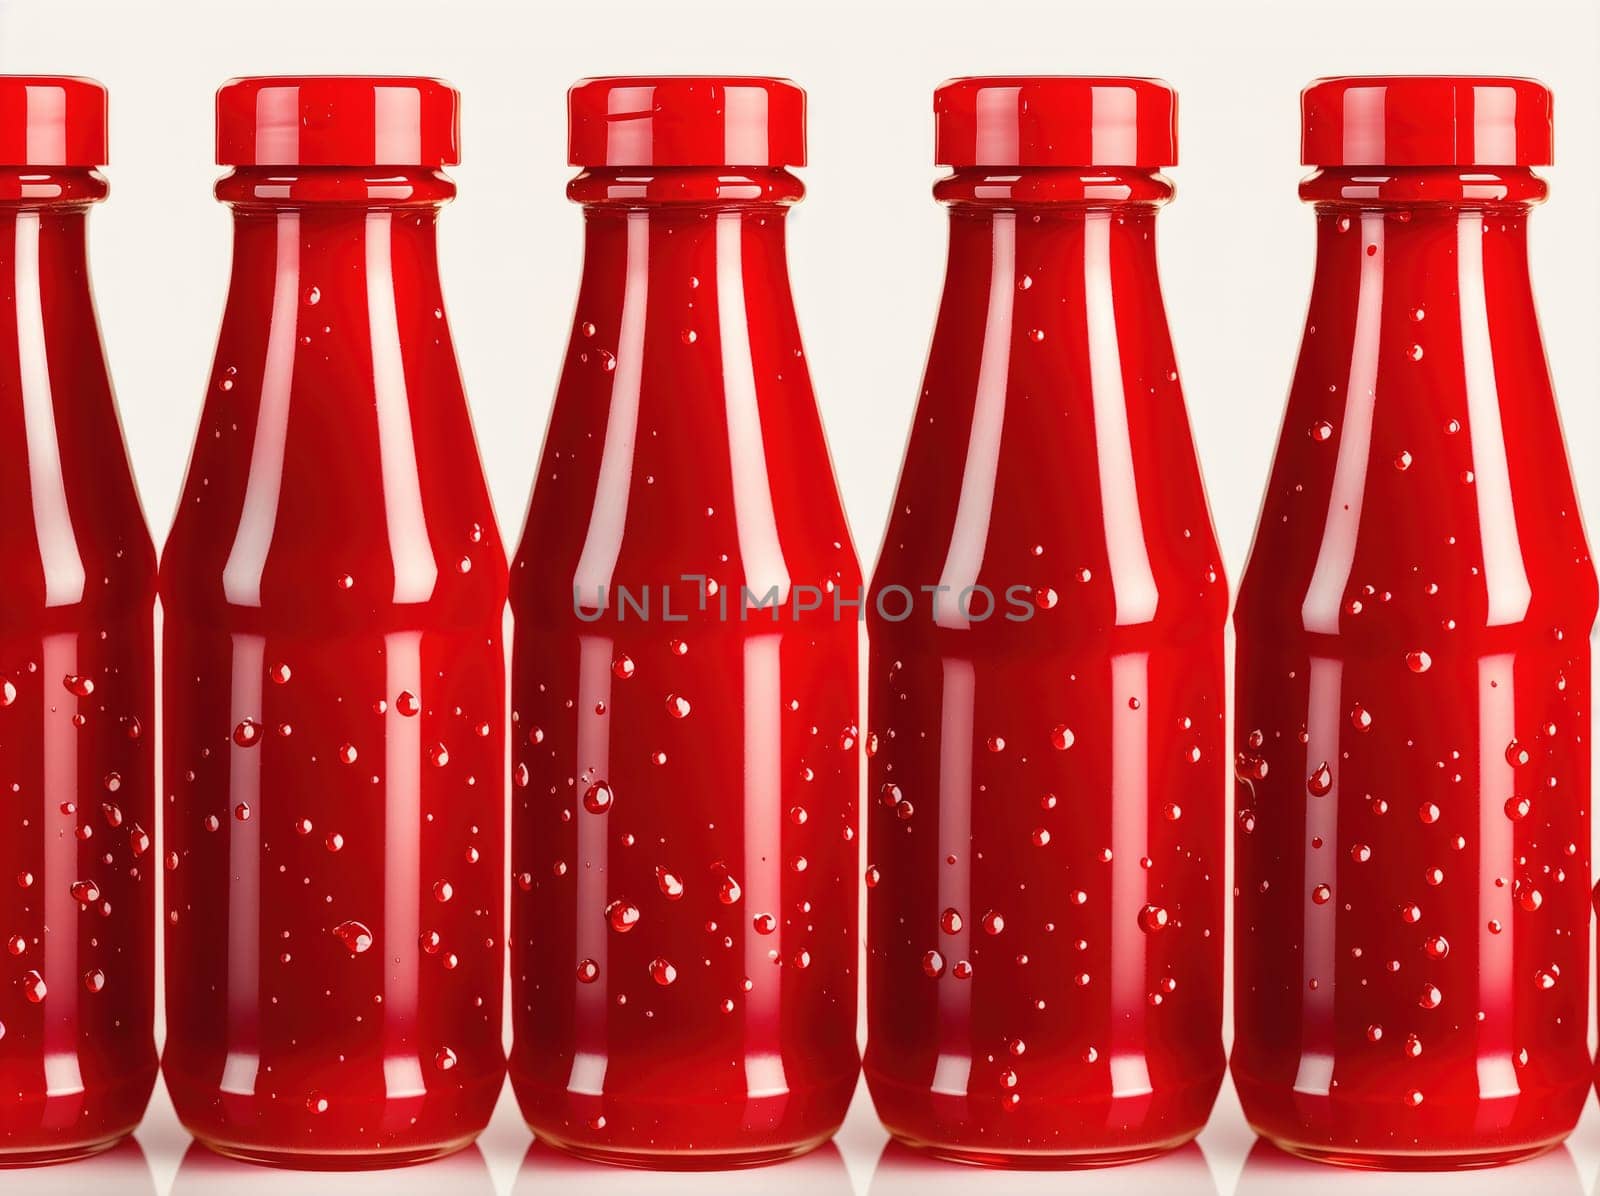 Red Bottles on a White Background by creart